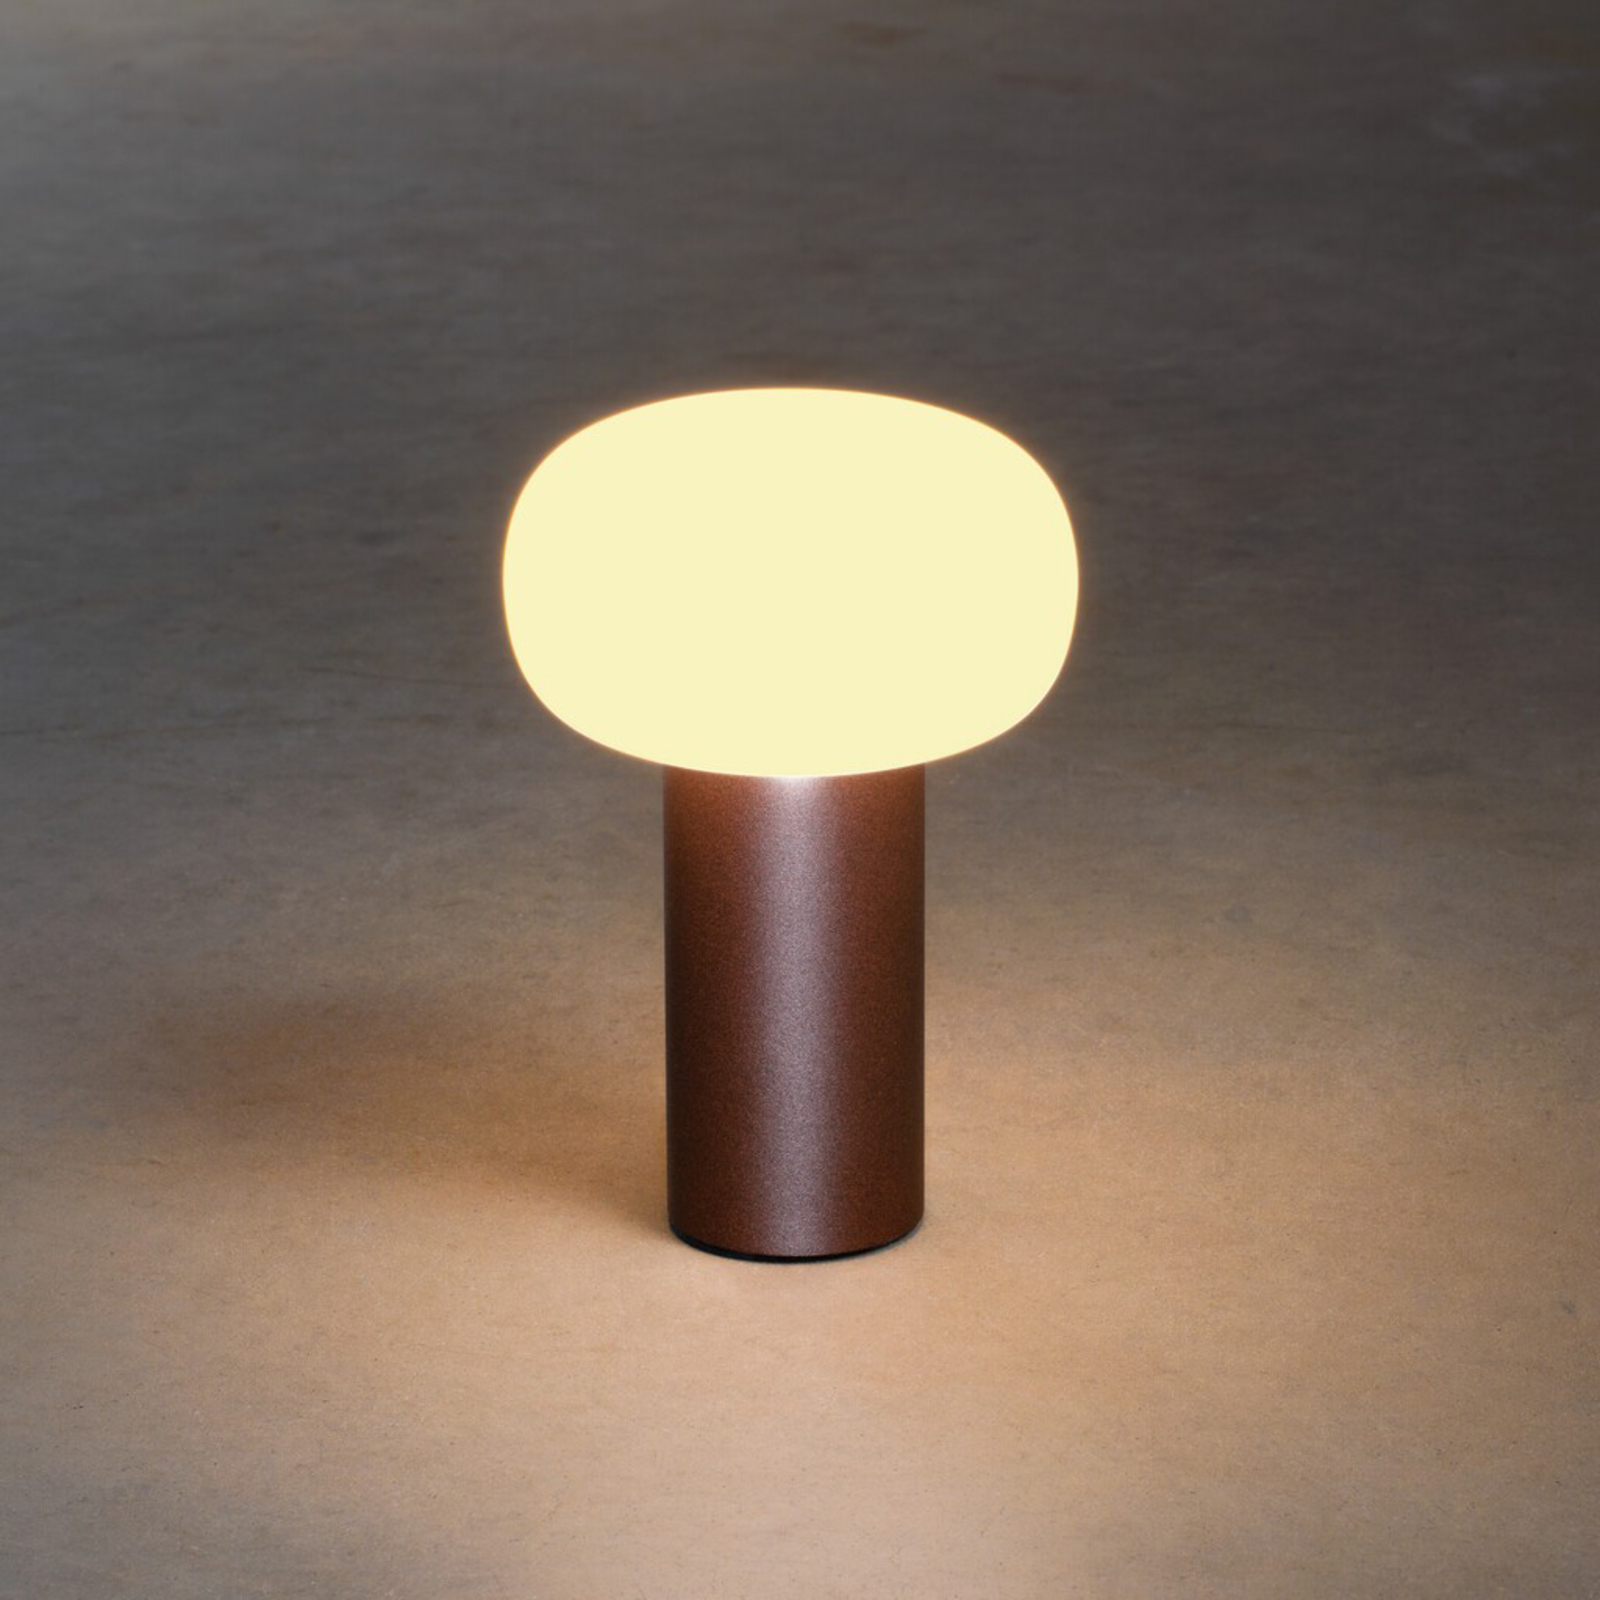 Lampe table LED Antibes IP54 batterie RGBW rouille